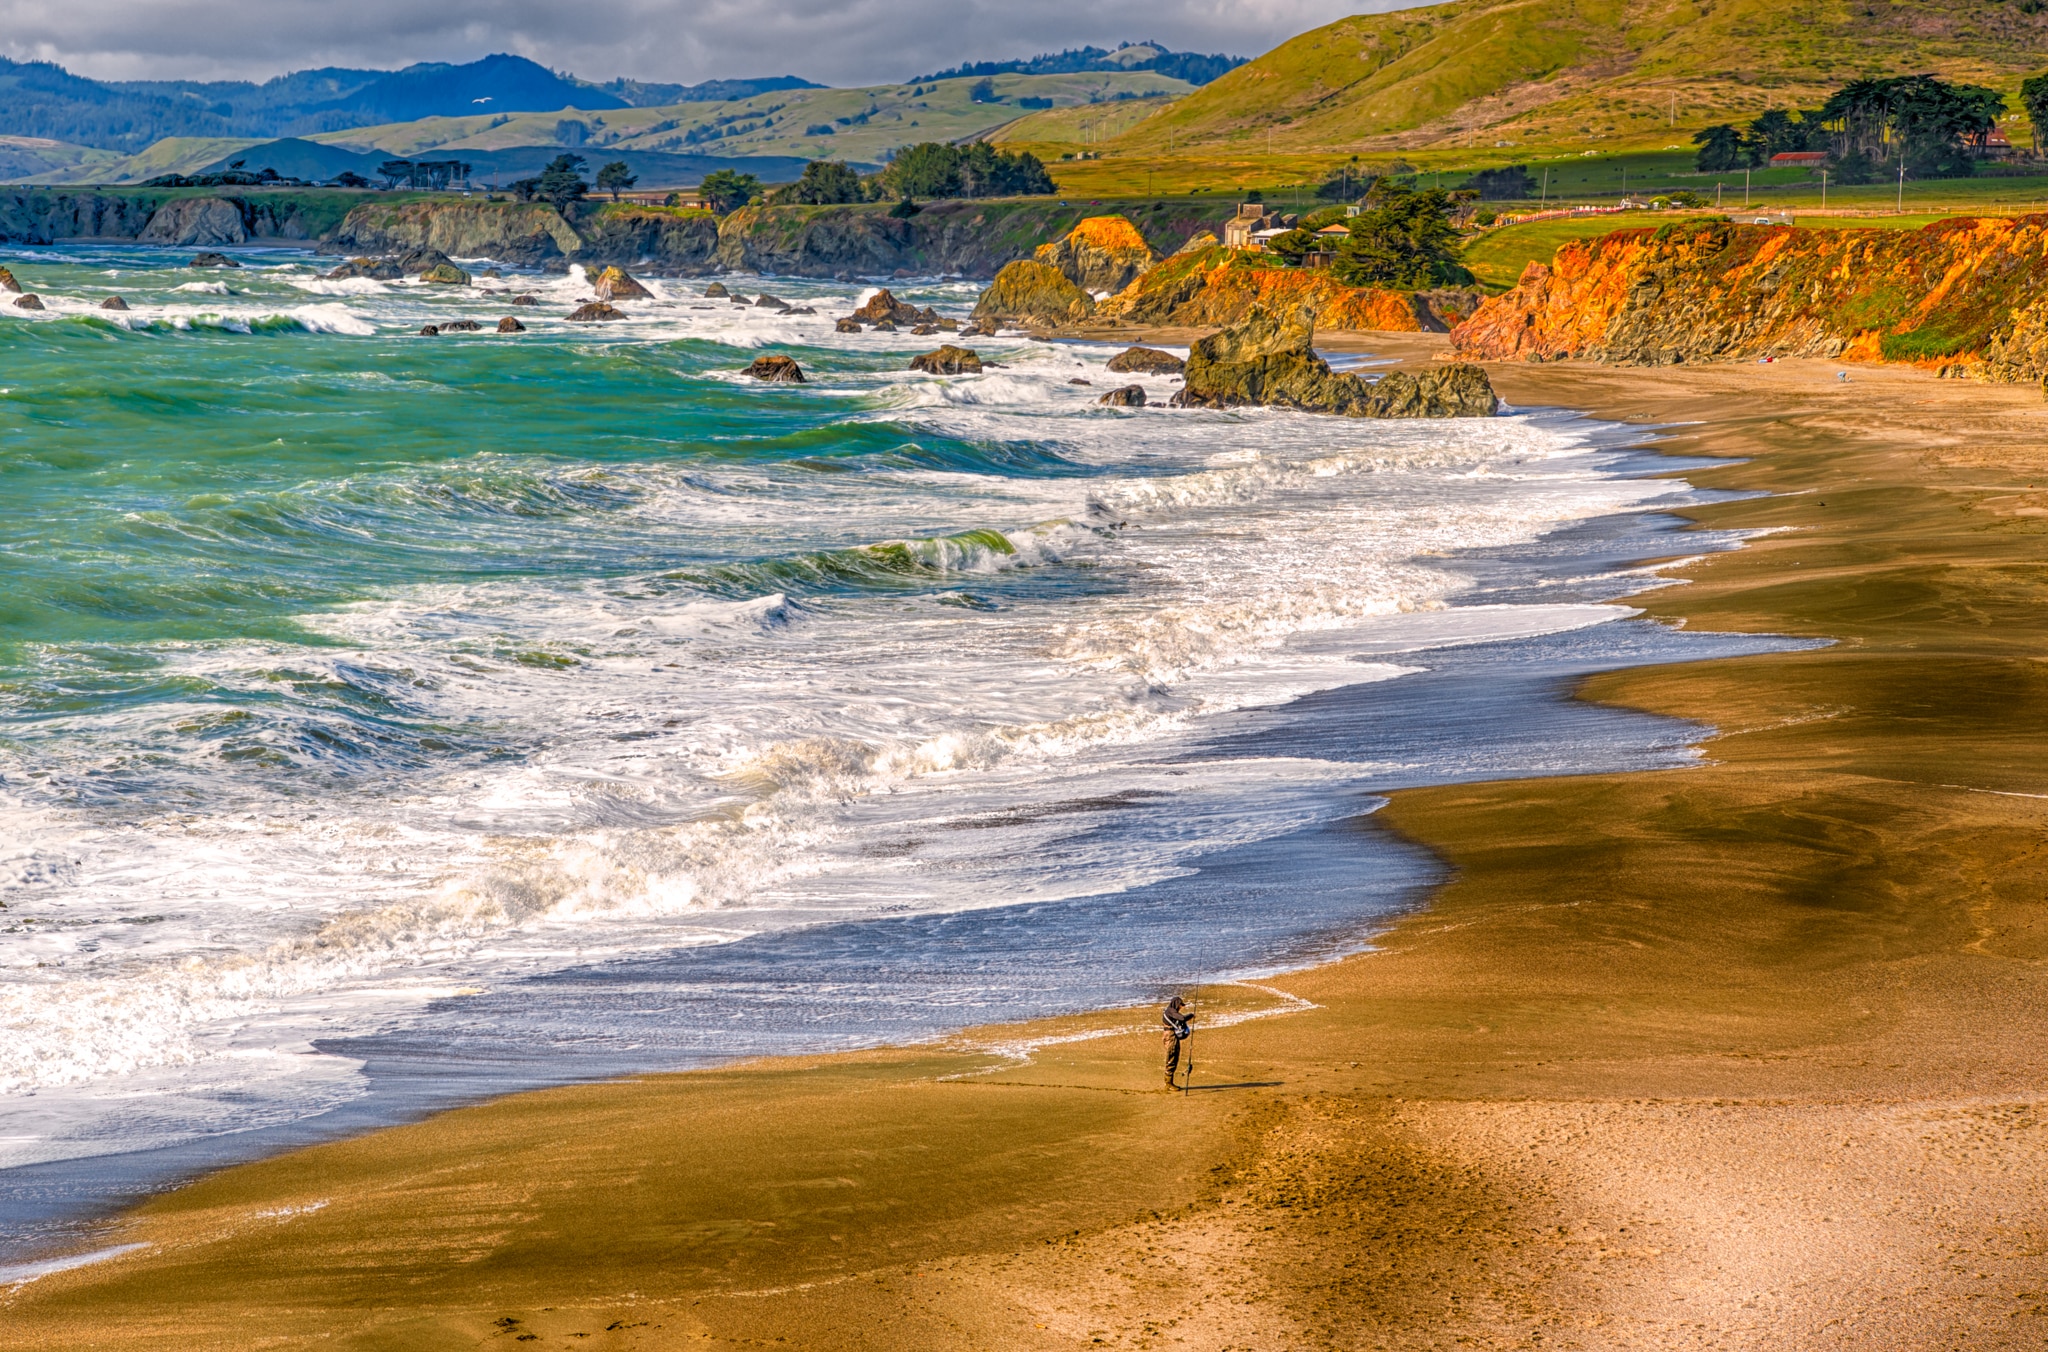 A fisherman enjoys an afternoon on the beach at Duncan's Landing, along CA Highway 1 in California.